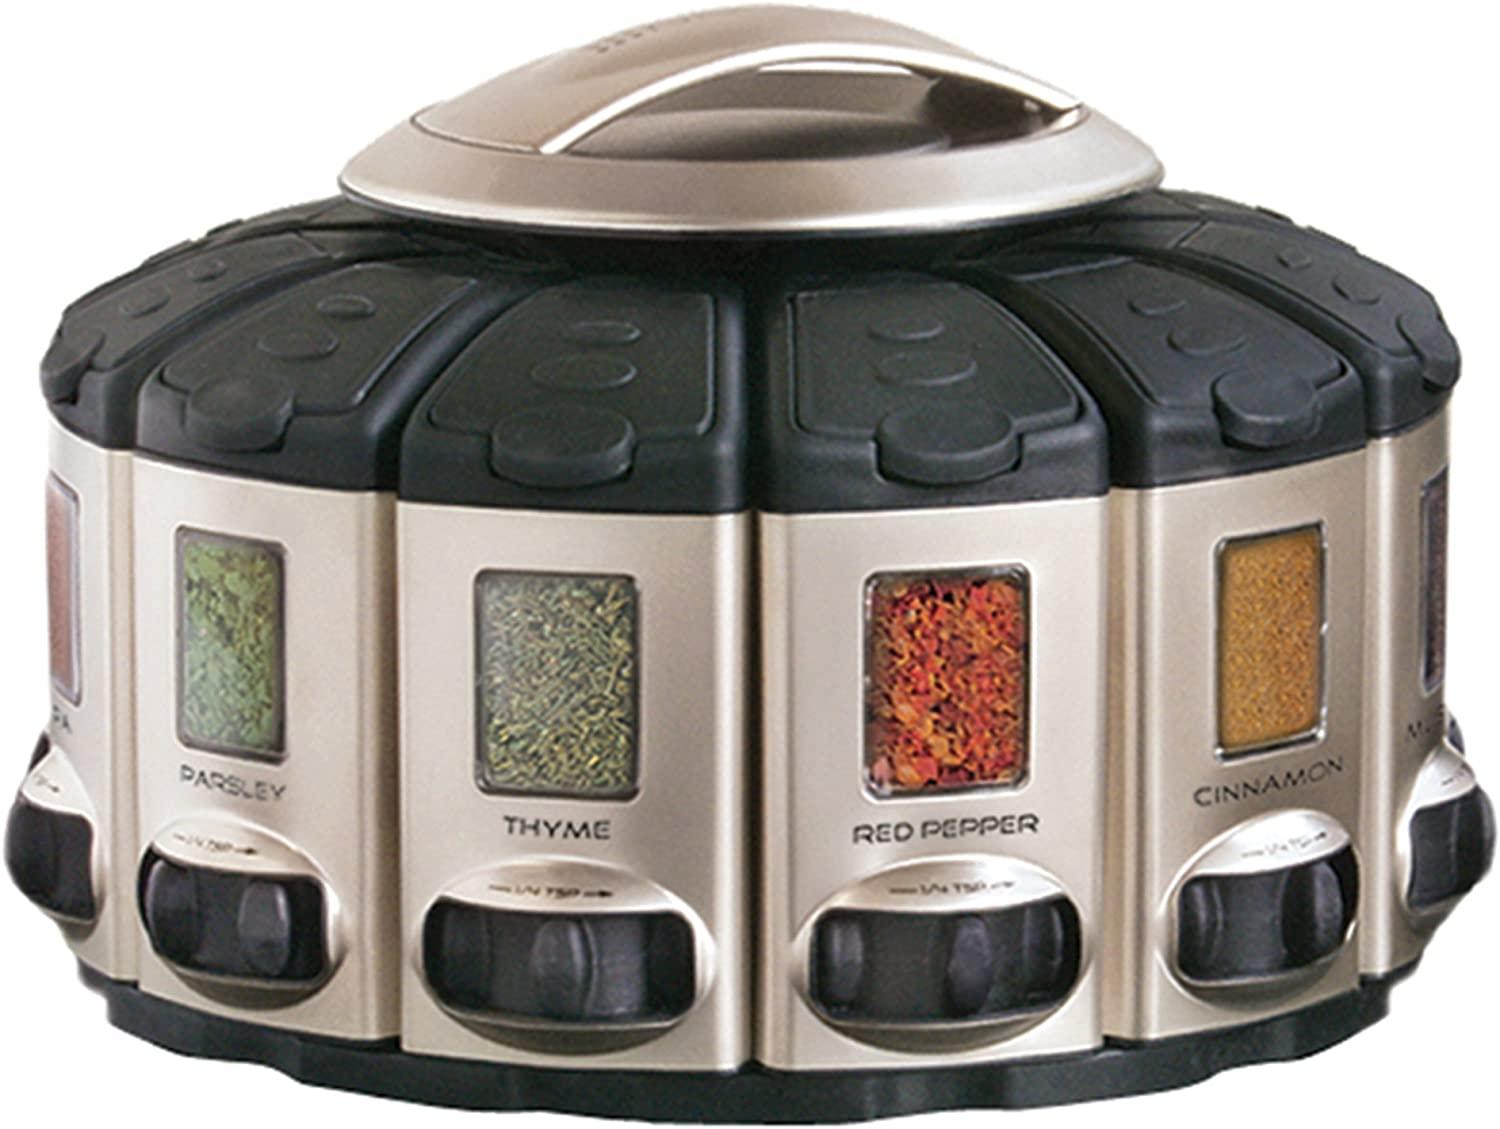 KitchenArt Select-A-Spice Auto-Measure Carousel for $29.05 Shipped